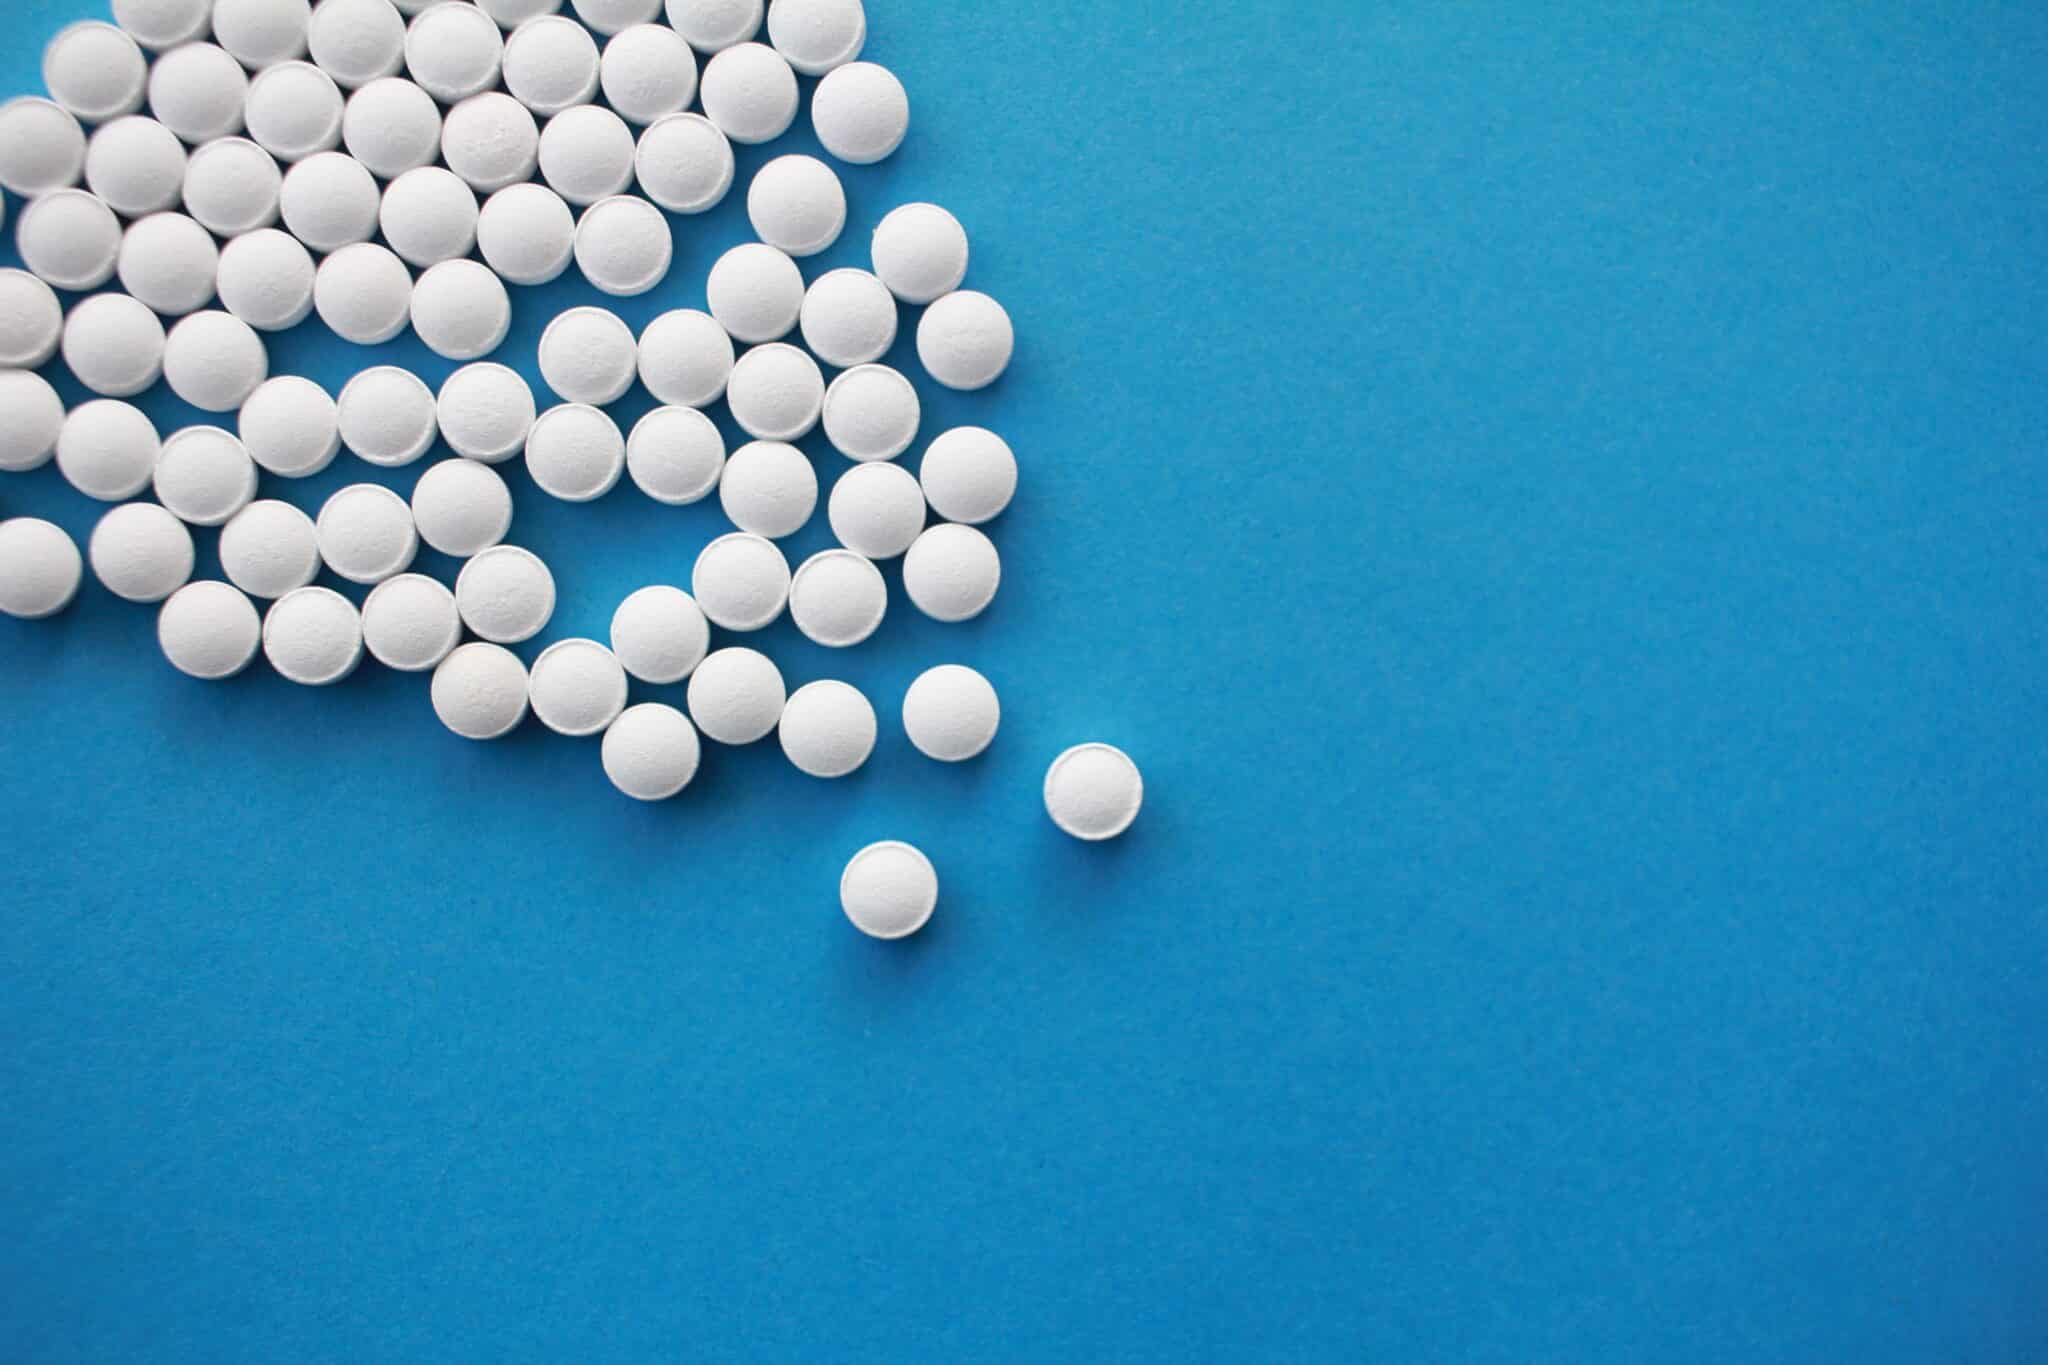 White pills spread out on a blue background.